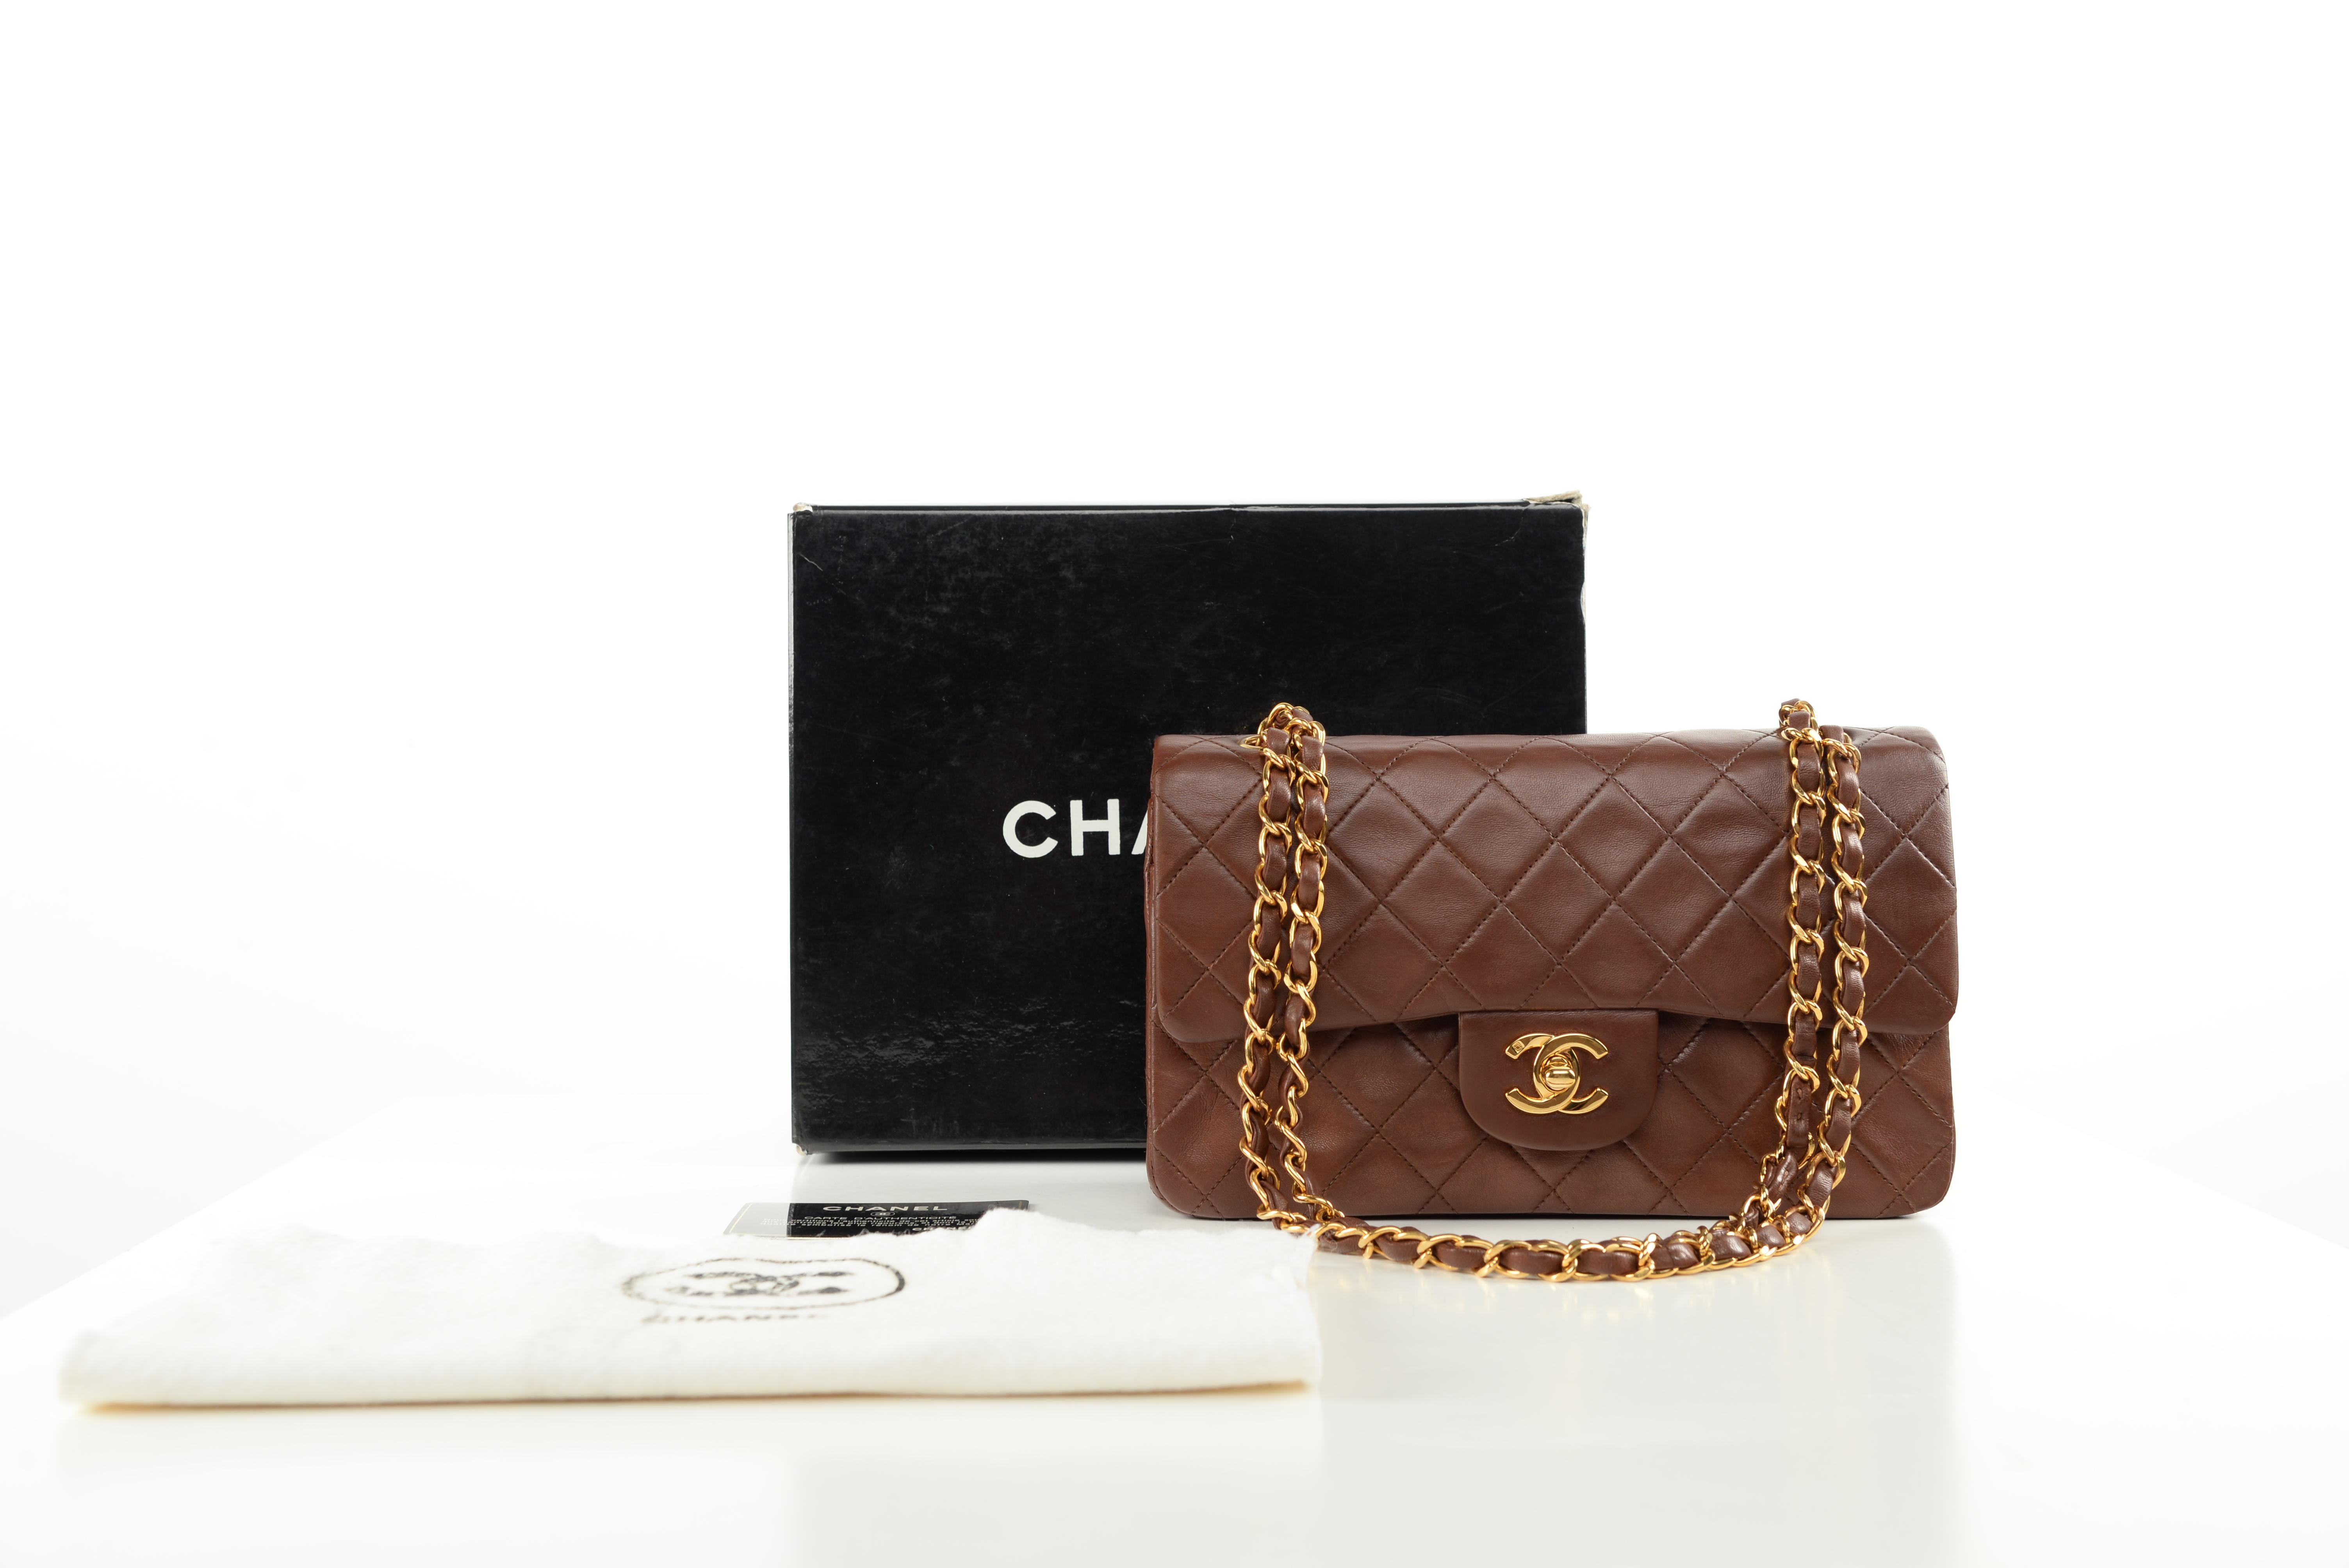 From the collection of SAVINETI we offer this Chanel Classic Flap Chestnut:
-	Brand: Chanel
-	Model: Classic Flap Small Chestnut
-	Year: 1994-1996
-	Code: 3582956
-	Condition: Good
-	Materials: Lambskin Leather, 24k gold-plated hardware
-	Extras: